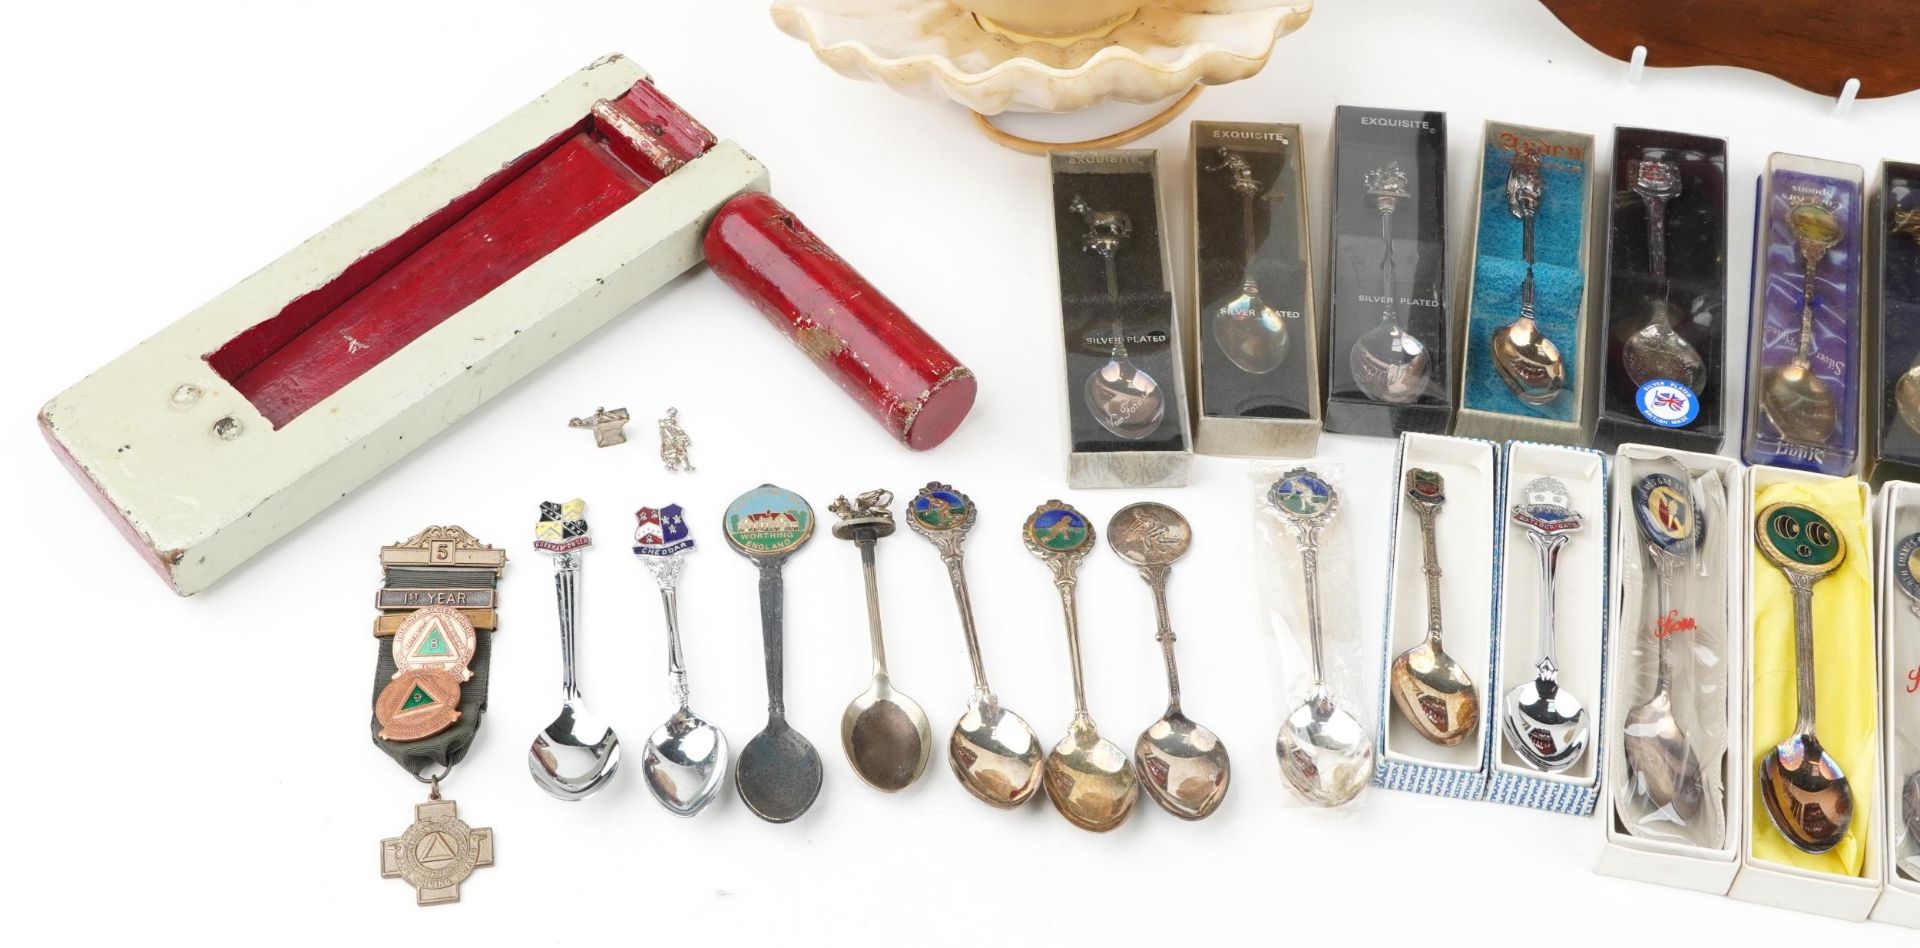 Sundry items including a vintage bird scarer, souvenir teaspoons and a table lamp in the form of a - Bild 3 aus 4